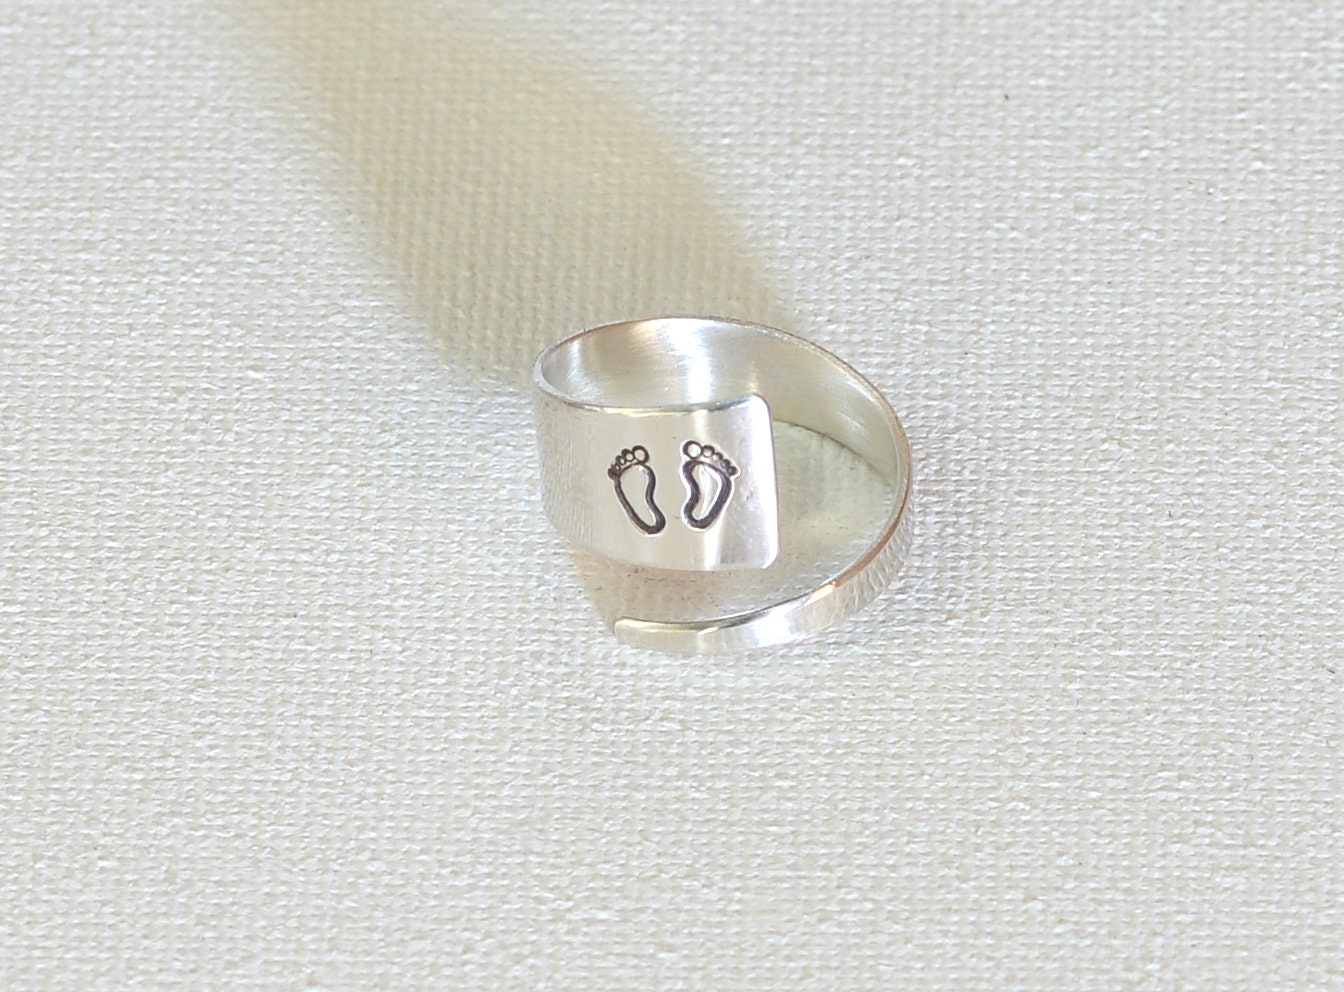 Baby Feet on Sterling Silver Wrap Ring - Bypass Ring for New Moms and Baby Showers